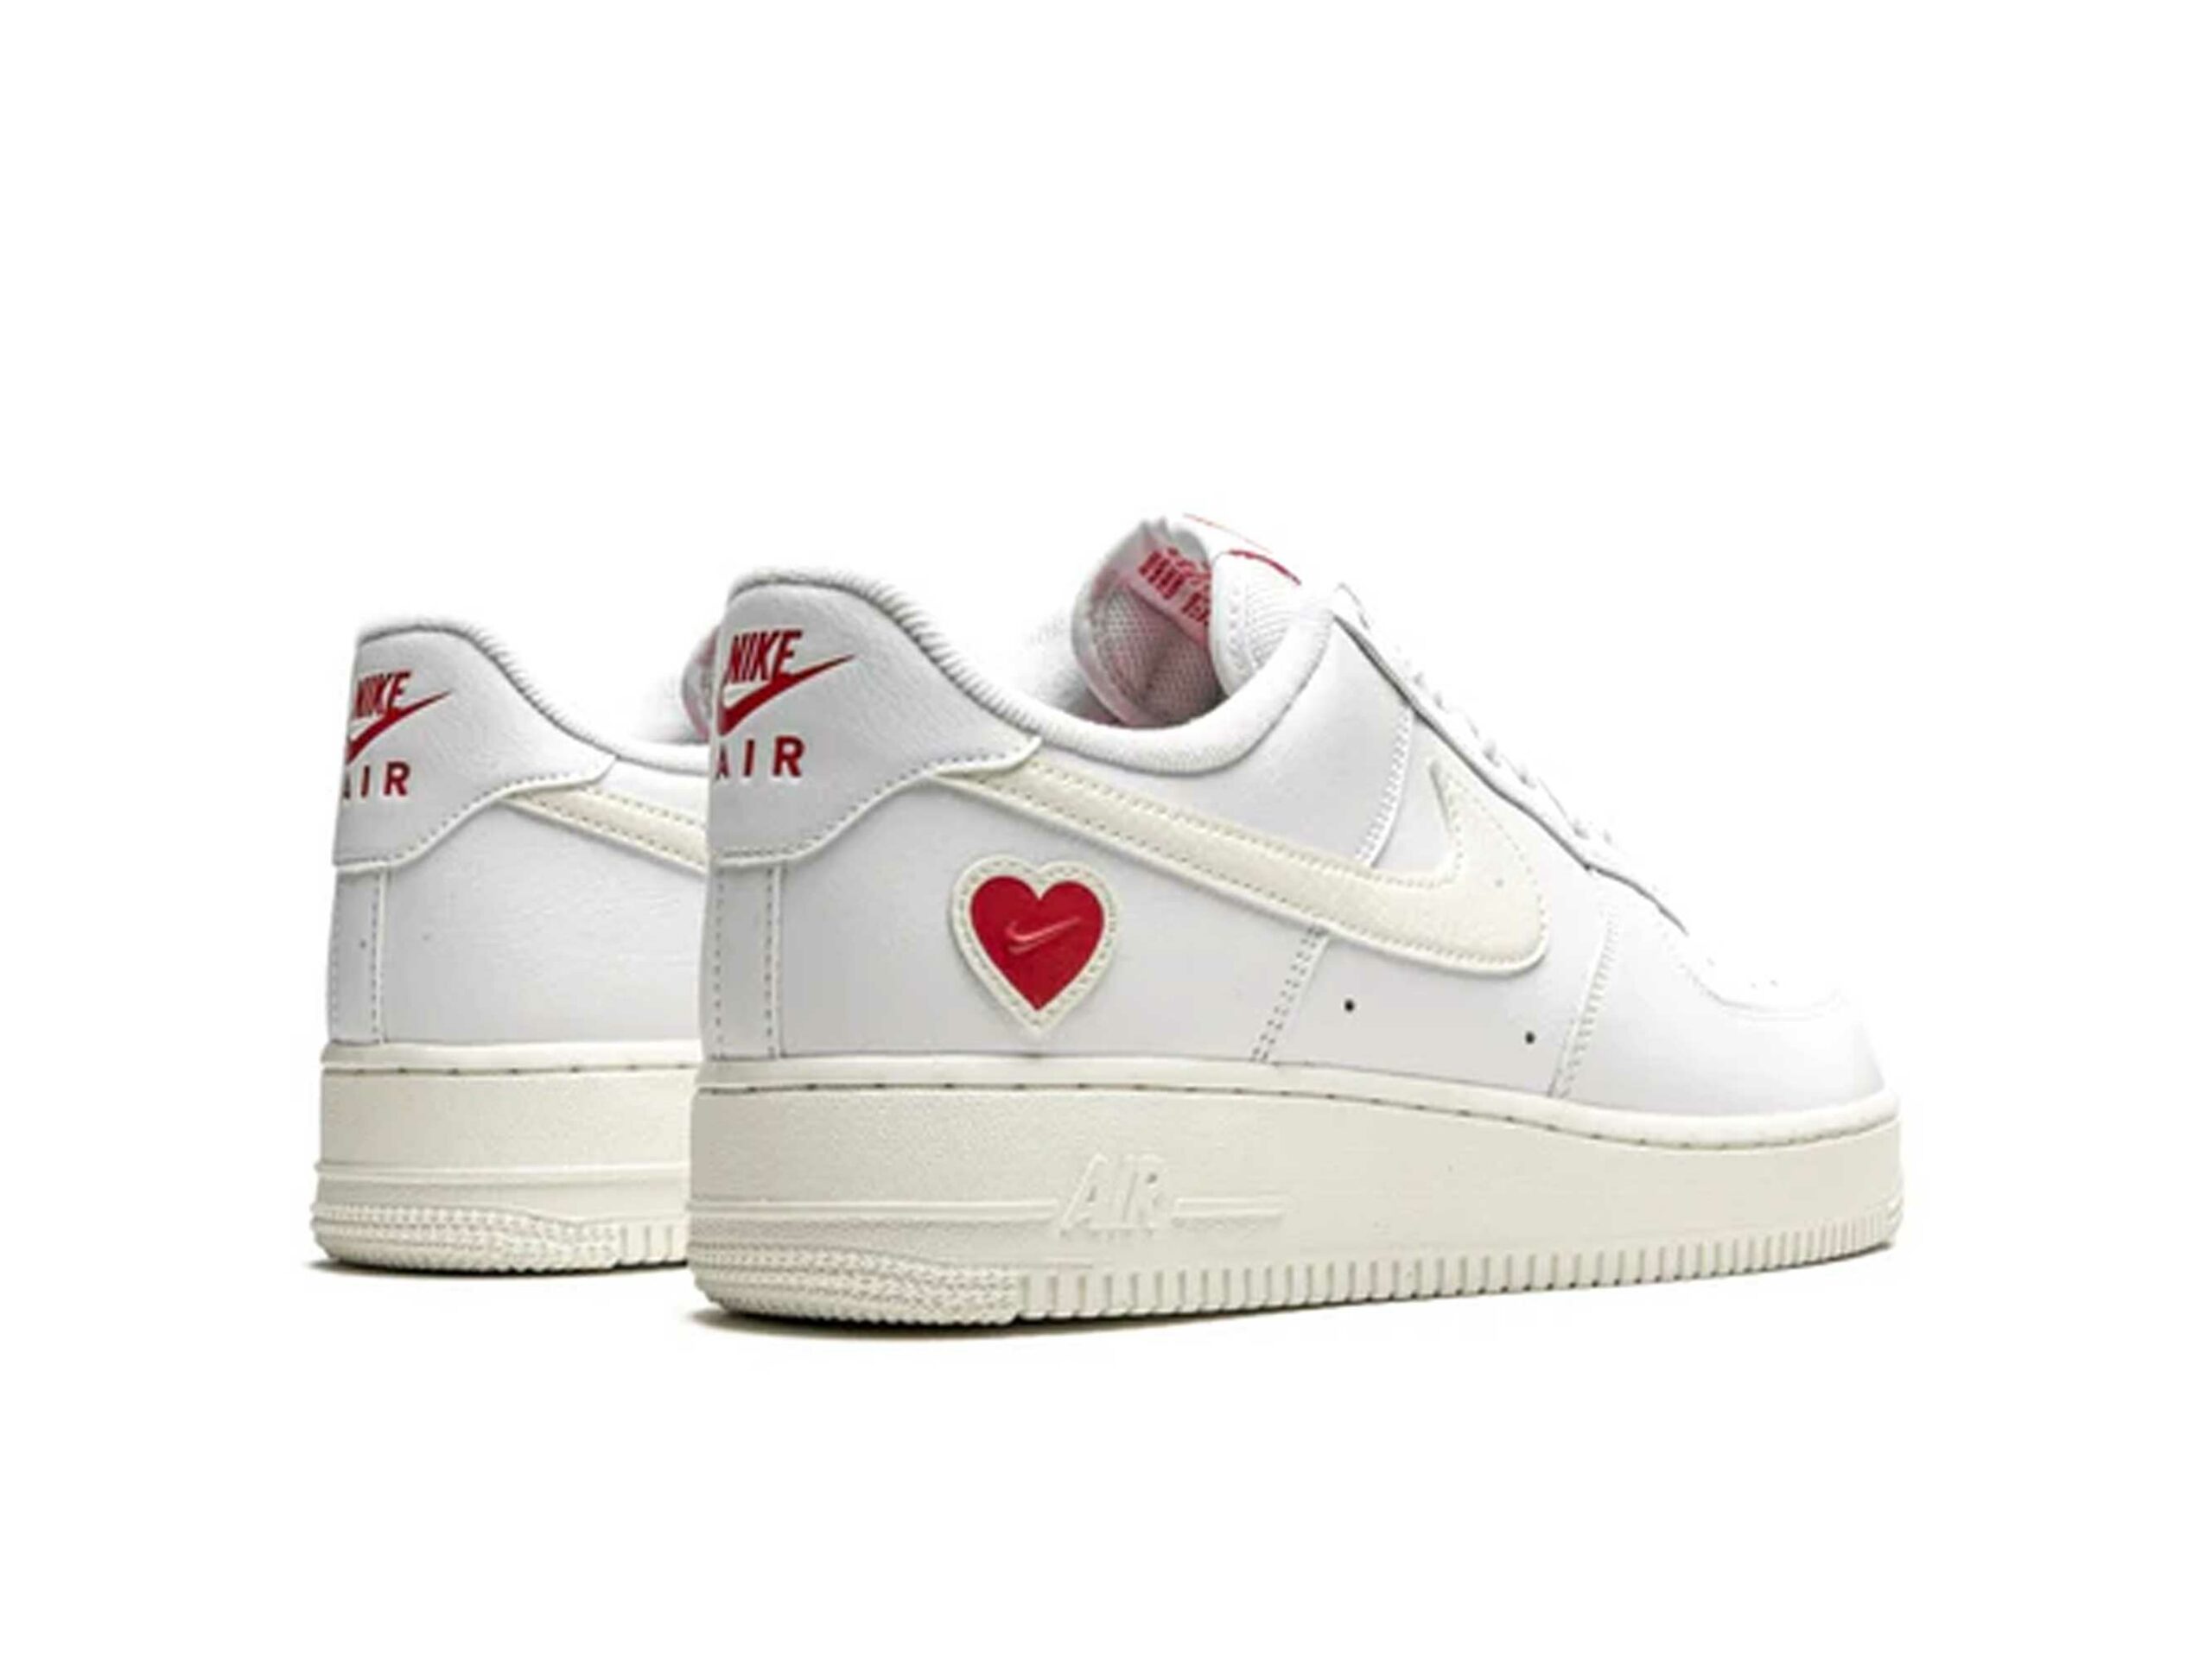 Air force 1 low valentine s day. Nike Air Force 1 Low Valentines Day 2021. Nike Air Force 1 Low “Valentine’s Day” 2023. Nike Air Force 1 Valentines Day 2021. Nike Air Force 1’07 “Valentines Day” (2021).